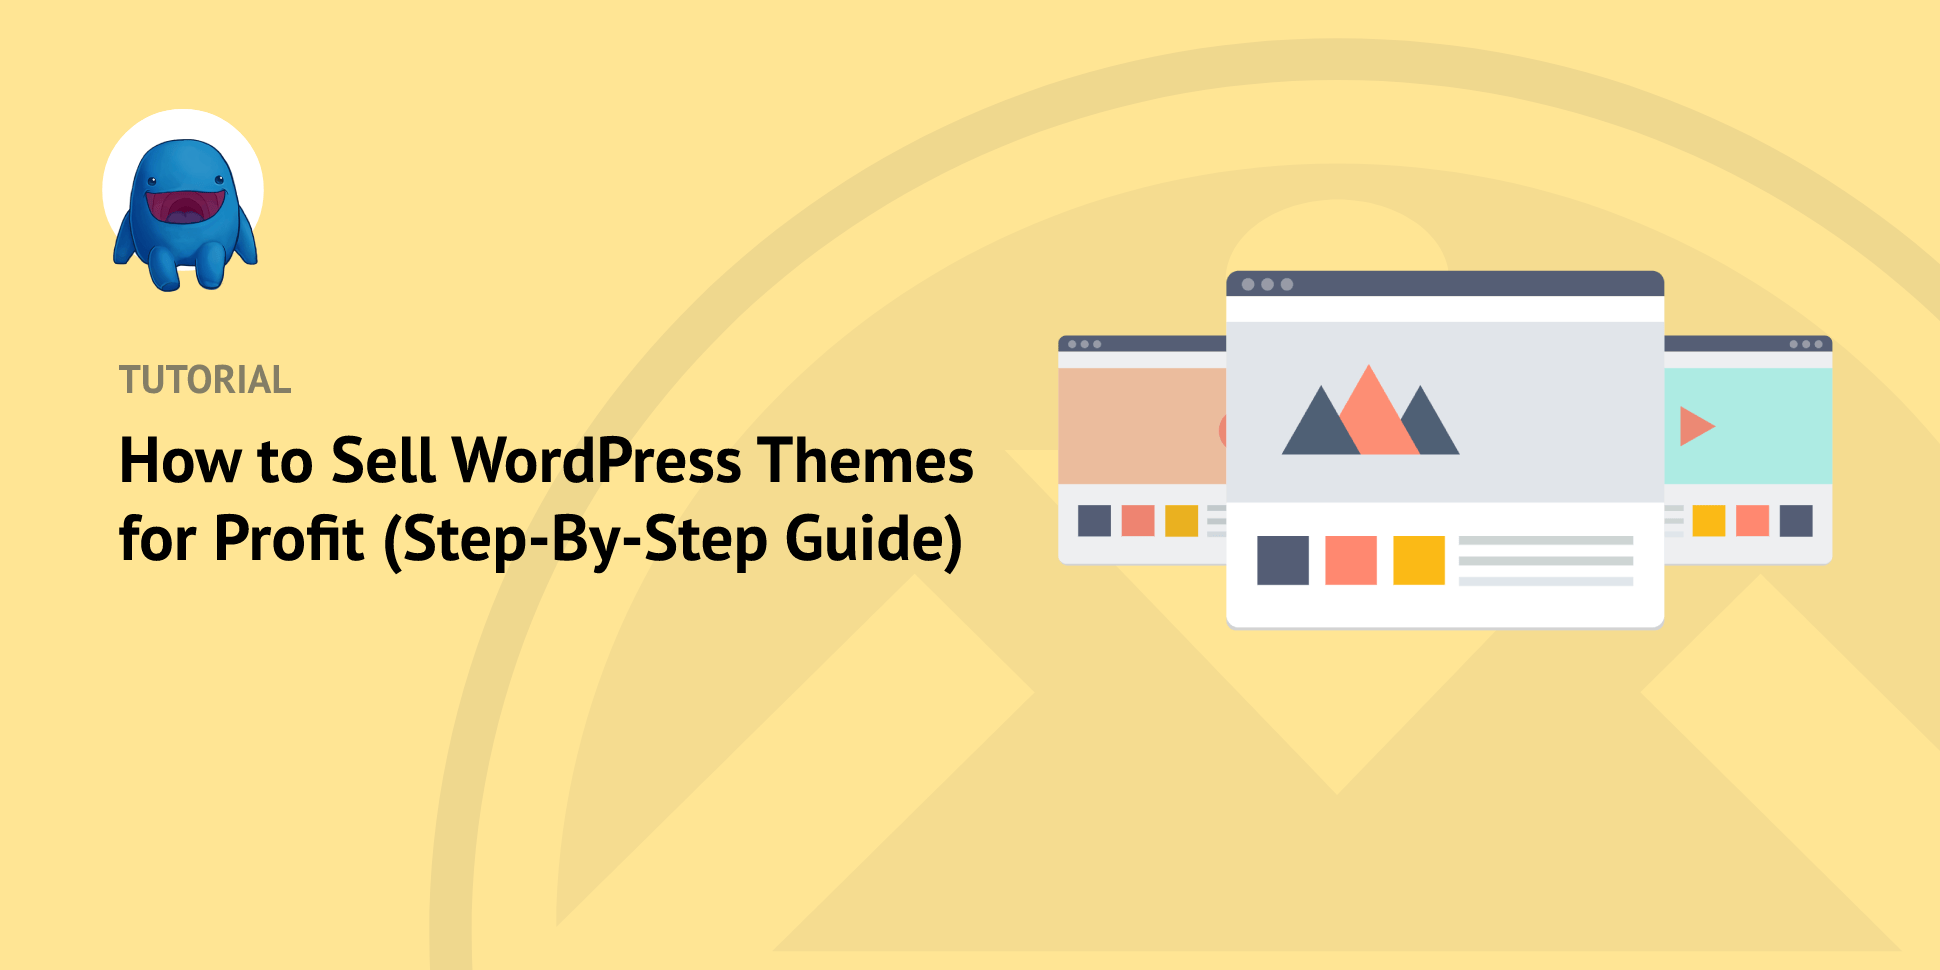 How to Sell WordPress Themes for Profit (Guide for Selling WordPress Themes)